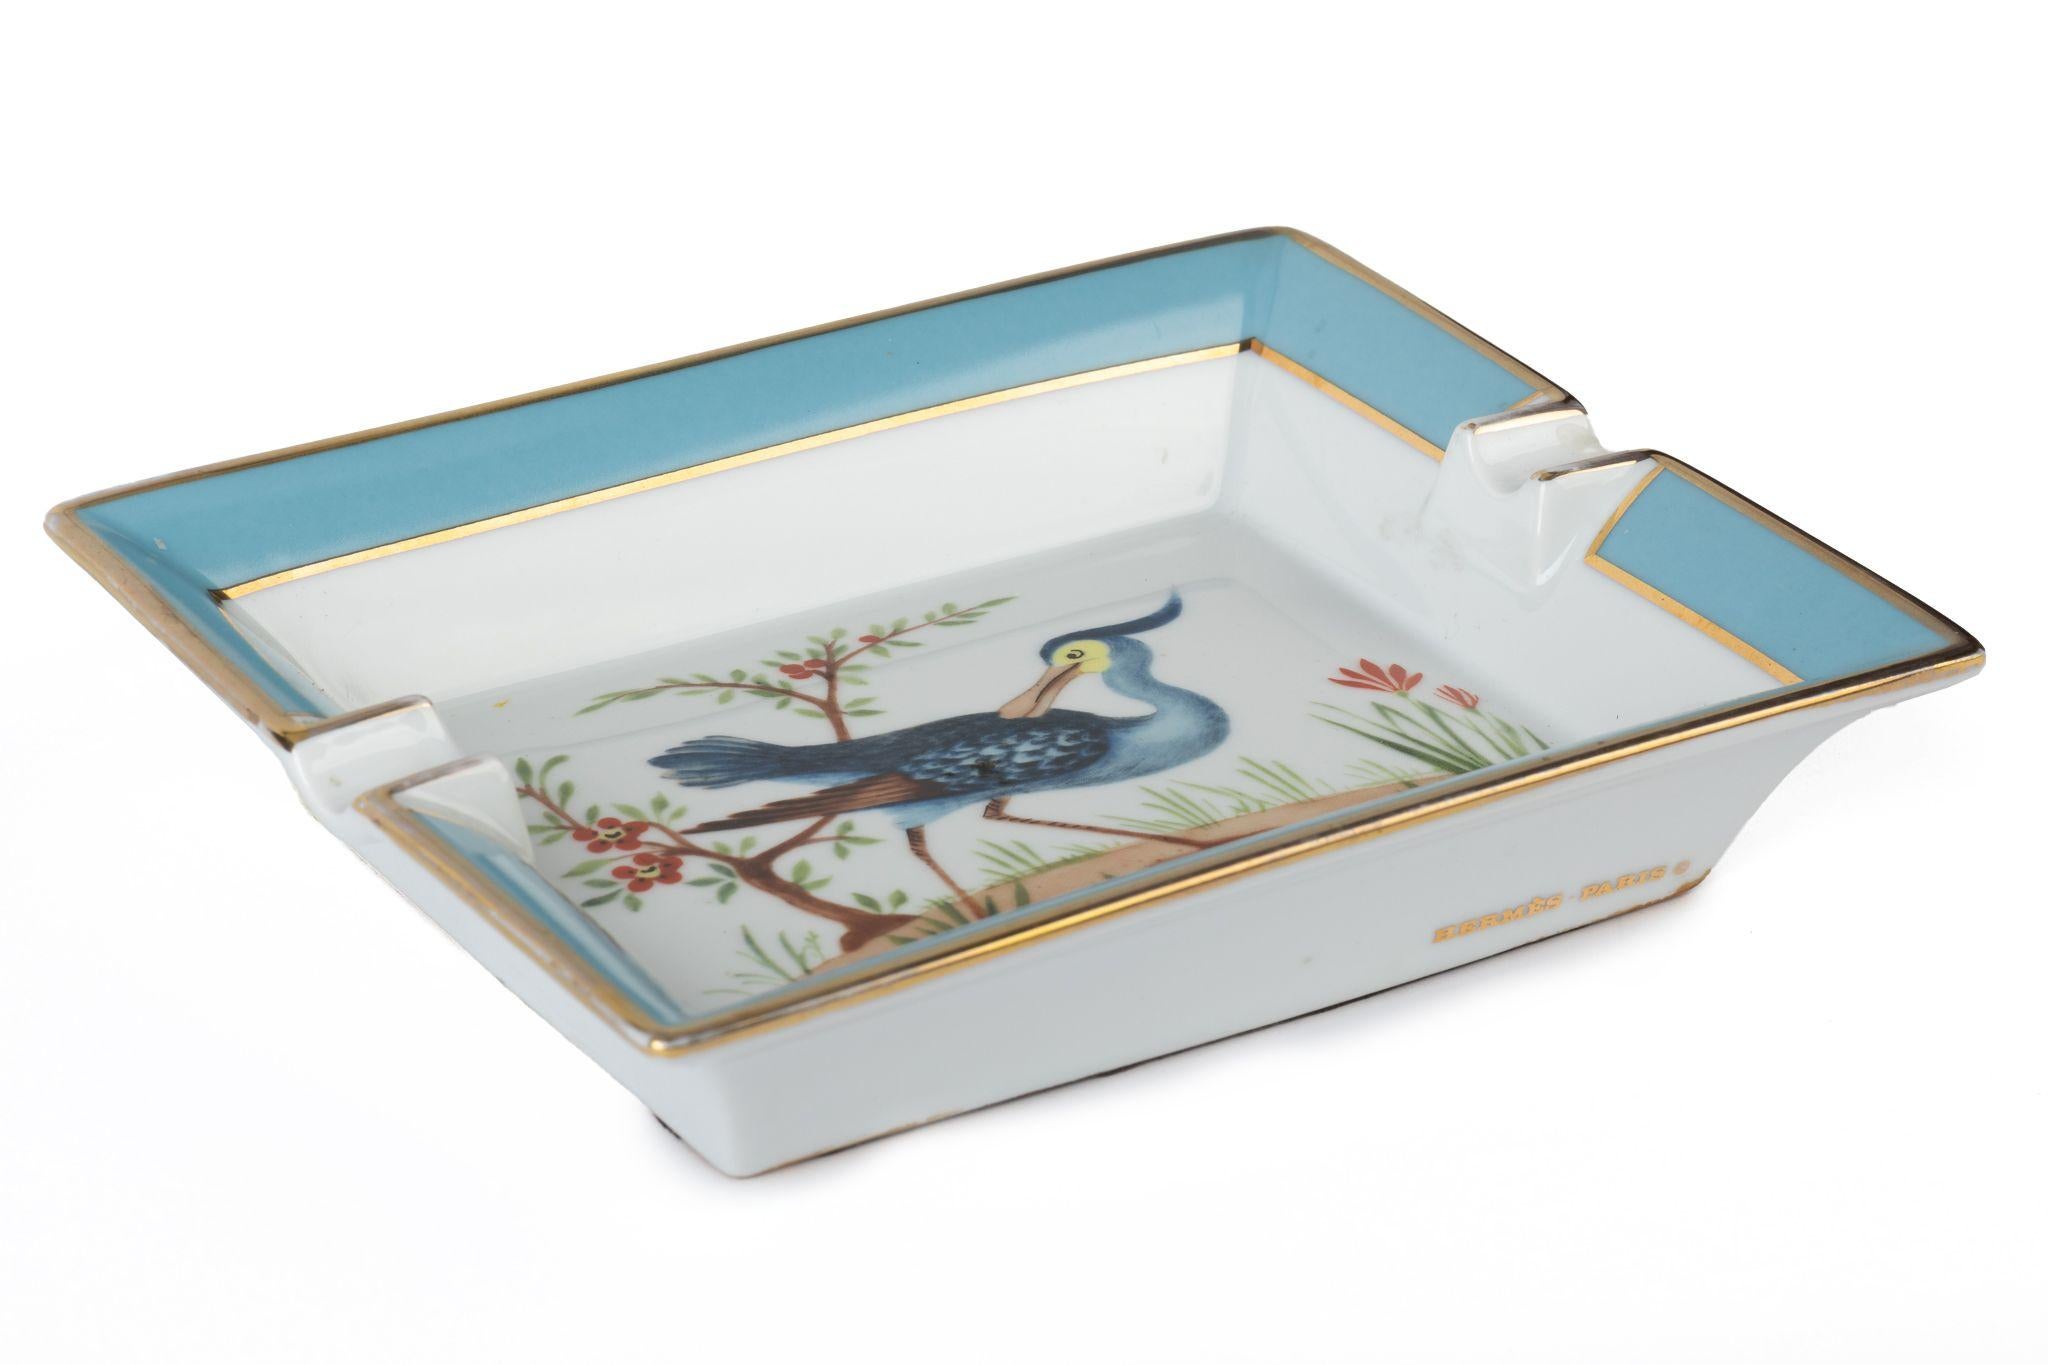 Hermès signature ashtray in light blue with a bird design in blue and yellow. The edges are colored light blue. Suede stamped bottom. The piece is in excellent condition. Includes original box.